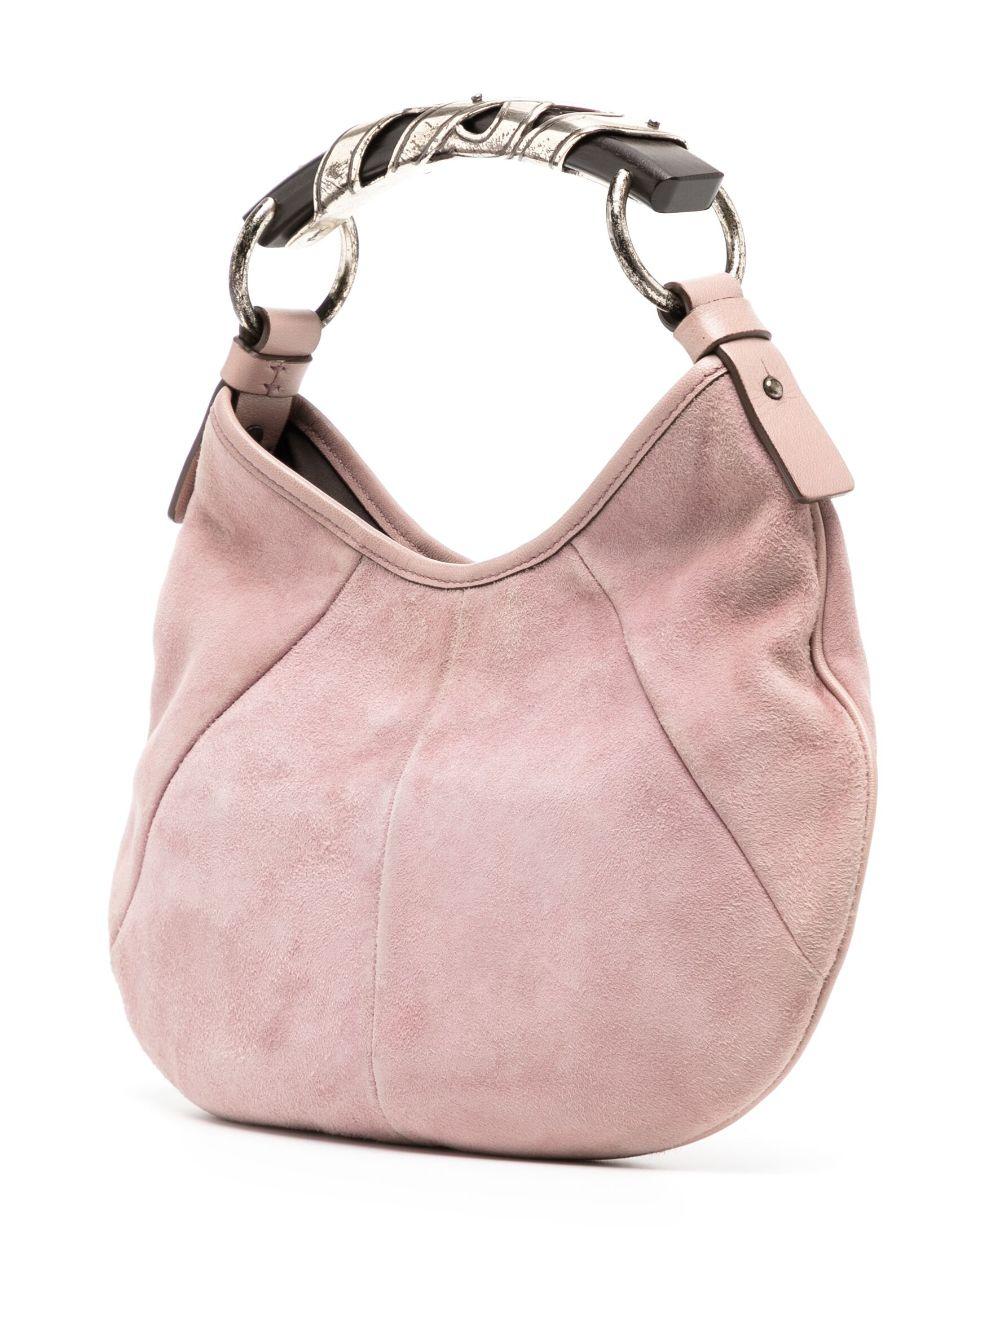 Chic Mini Mombasa suede top handle bag in blush pink.
Hobo silhouette crafted from panels of triangular suede leather, completed with a unique metal and wood horn-shaped handle detail. 
Magnetic fastening.
Silver-tone hardware.
This bag is in good